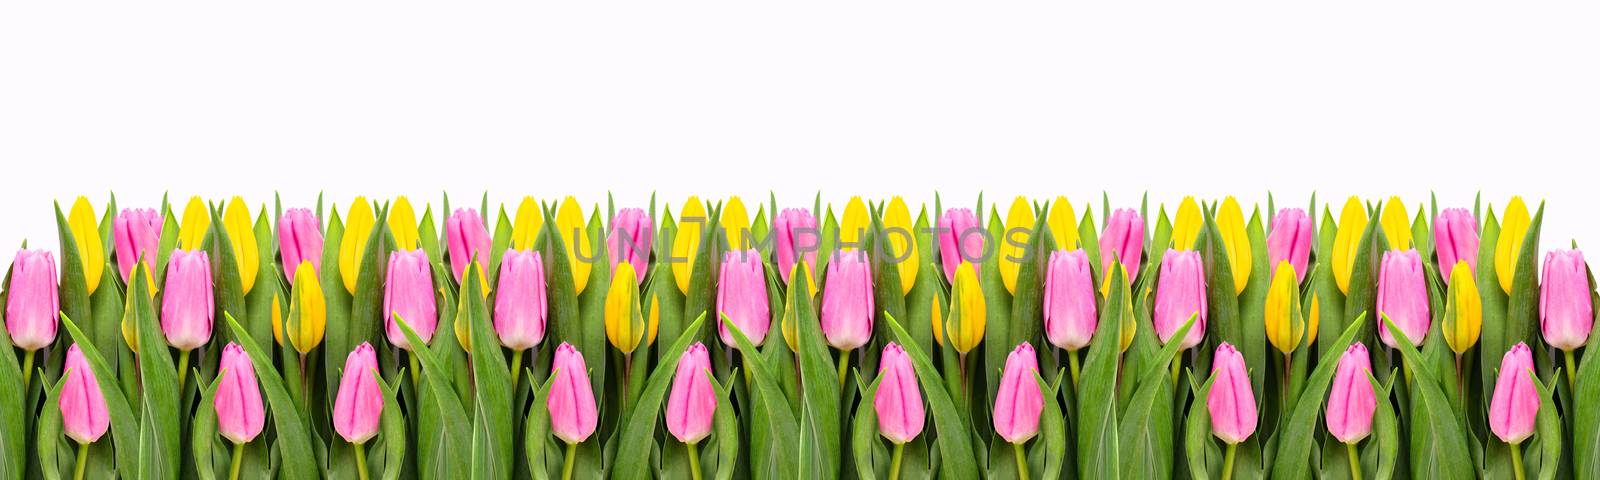 Pink and yellow tulip flowers border isolated on white background. Flat lay. Top view. Valentine's Day and Mother's Day background.